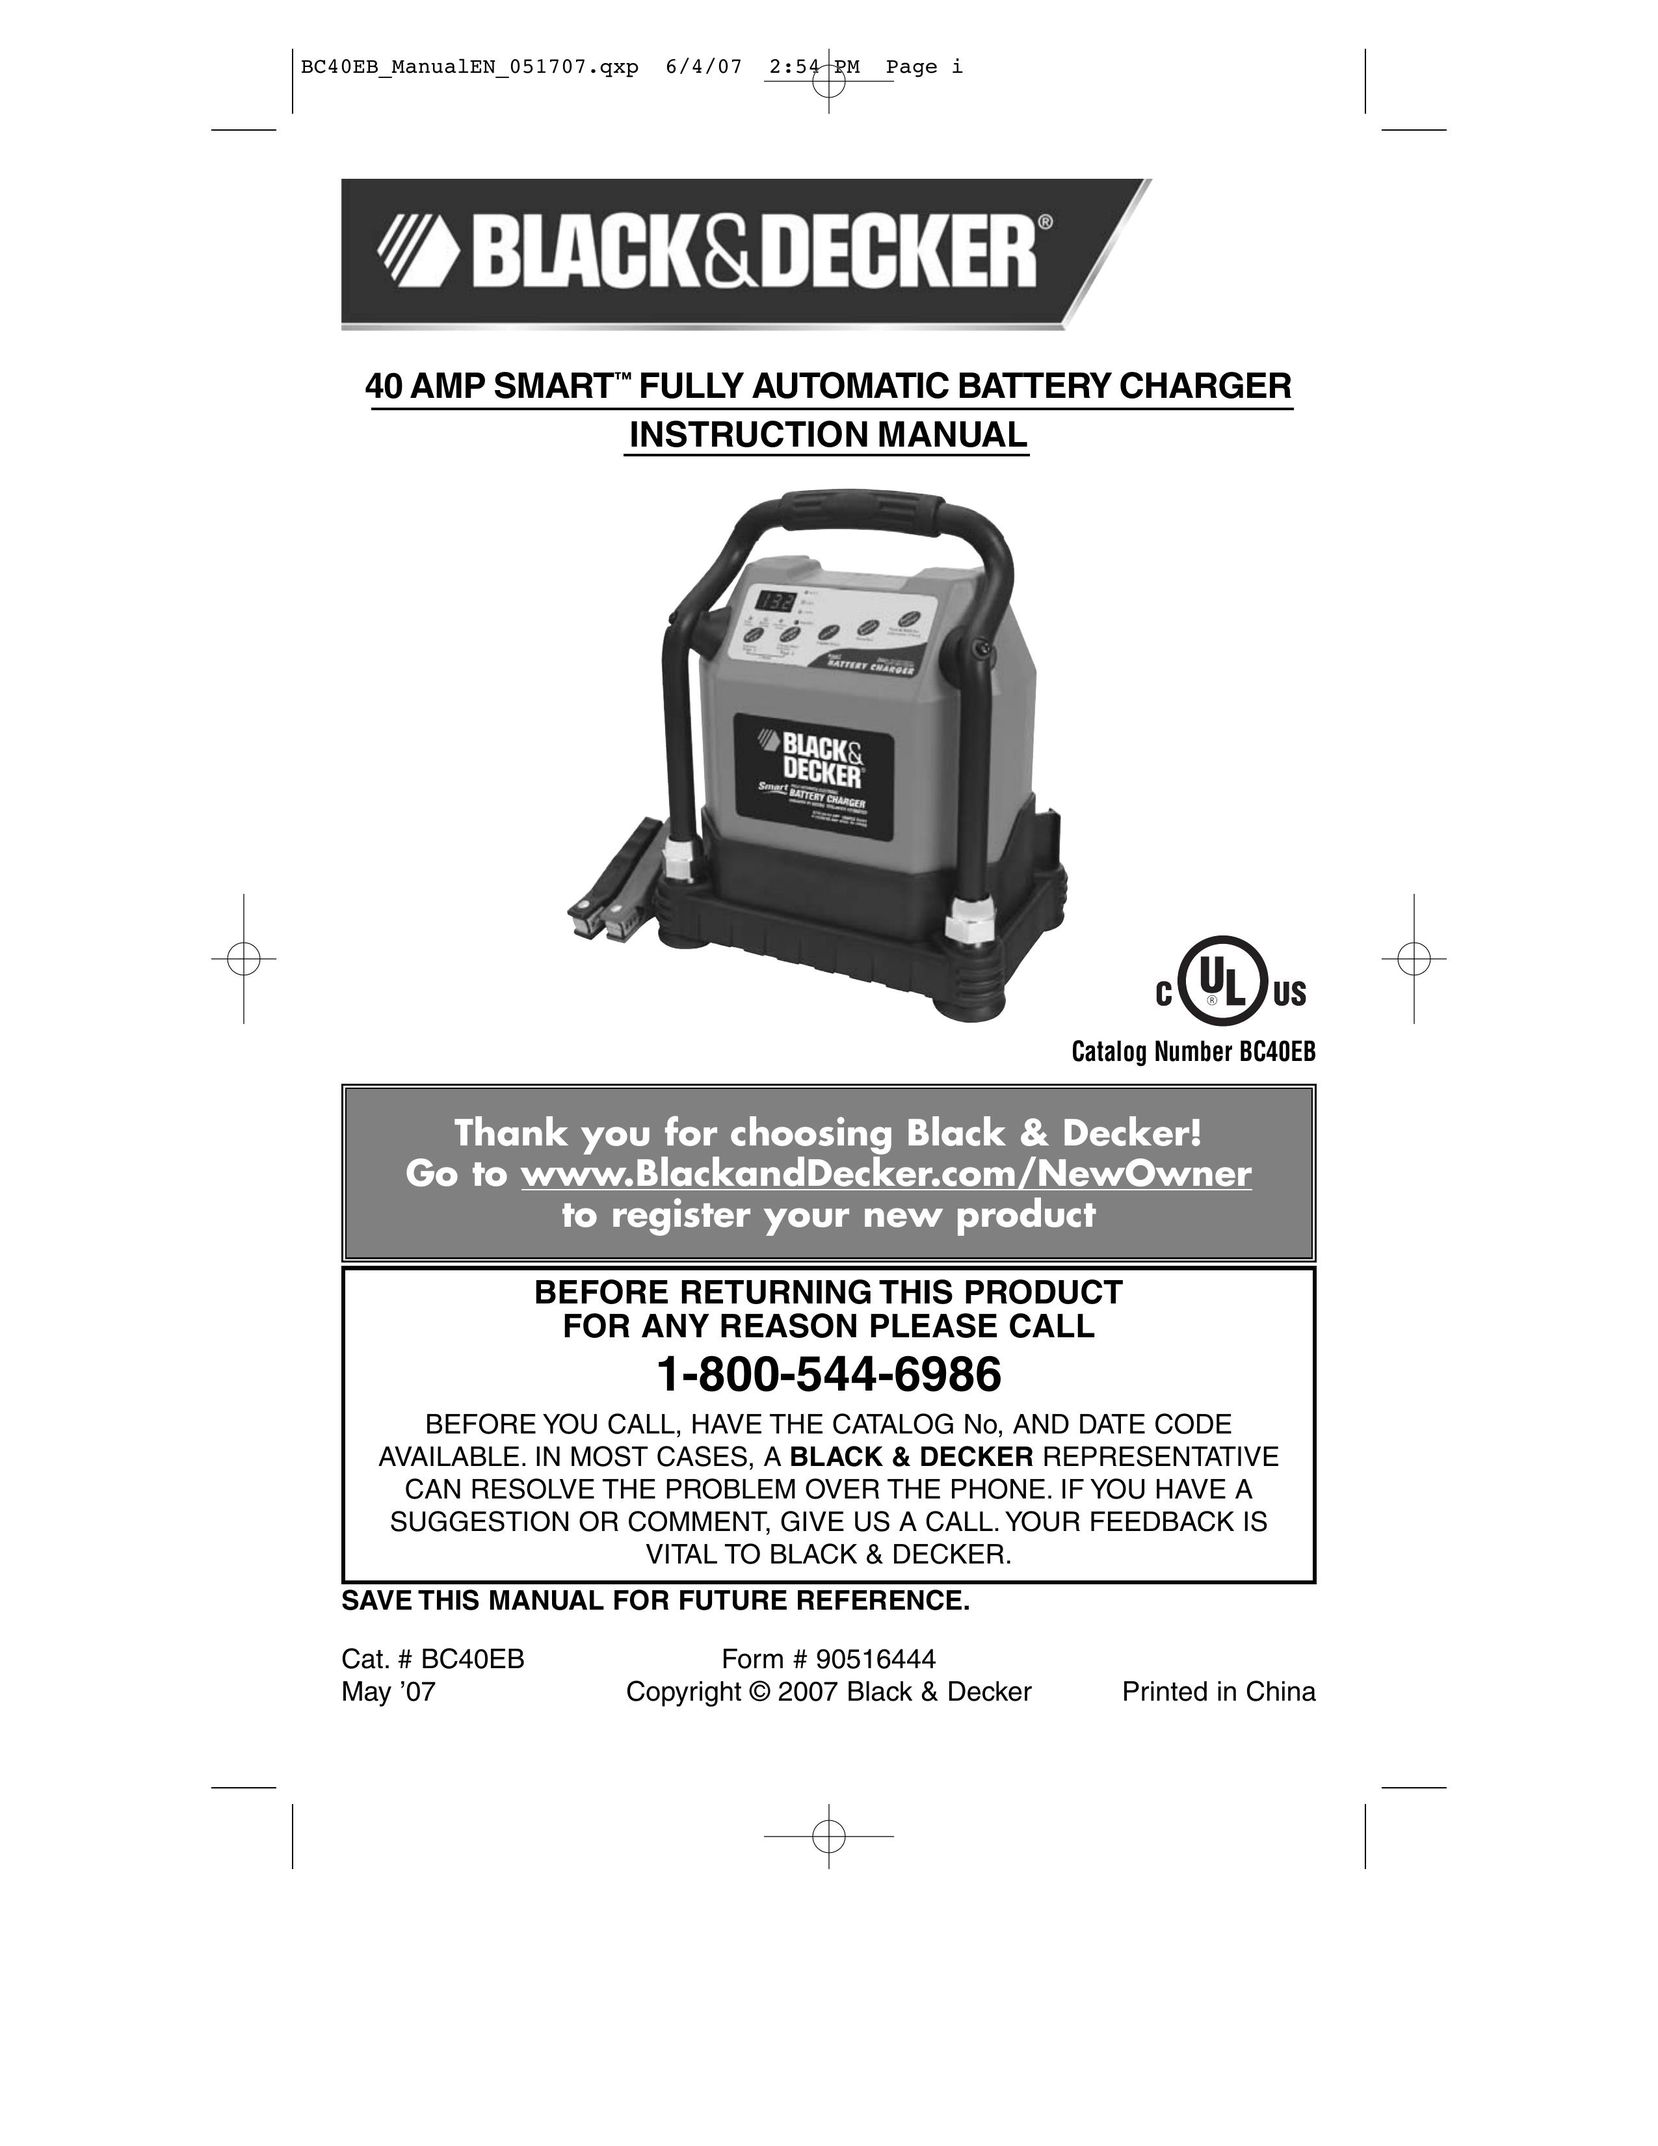 Black & Decker BC40EB Battery Charger User Manual